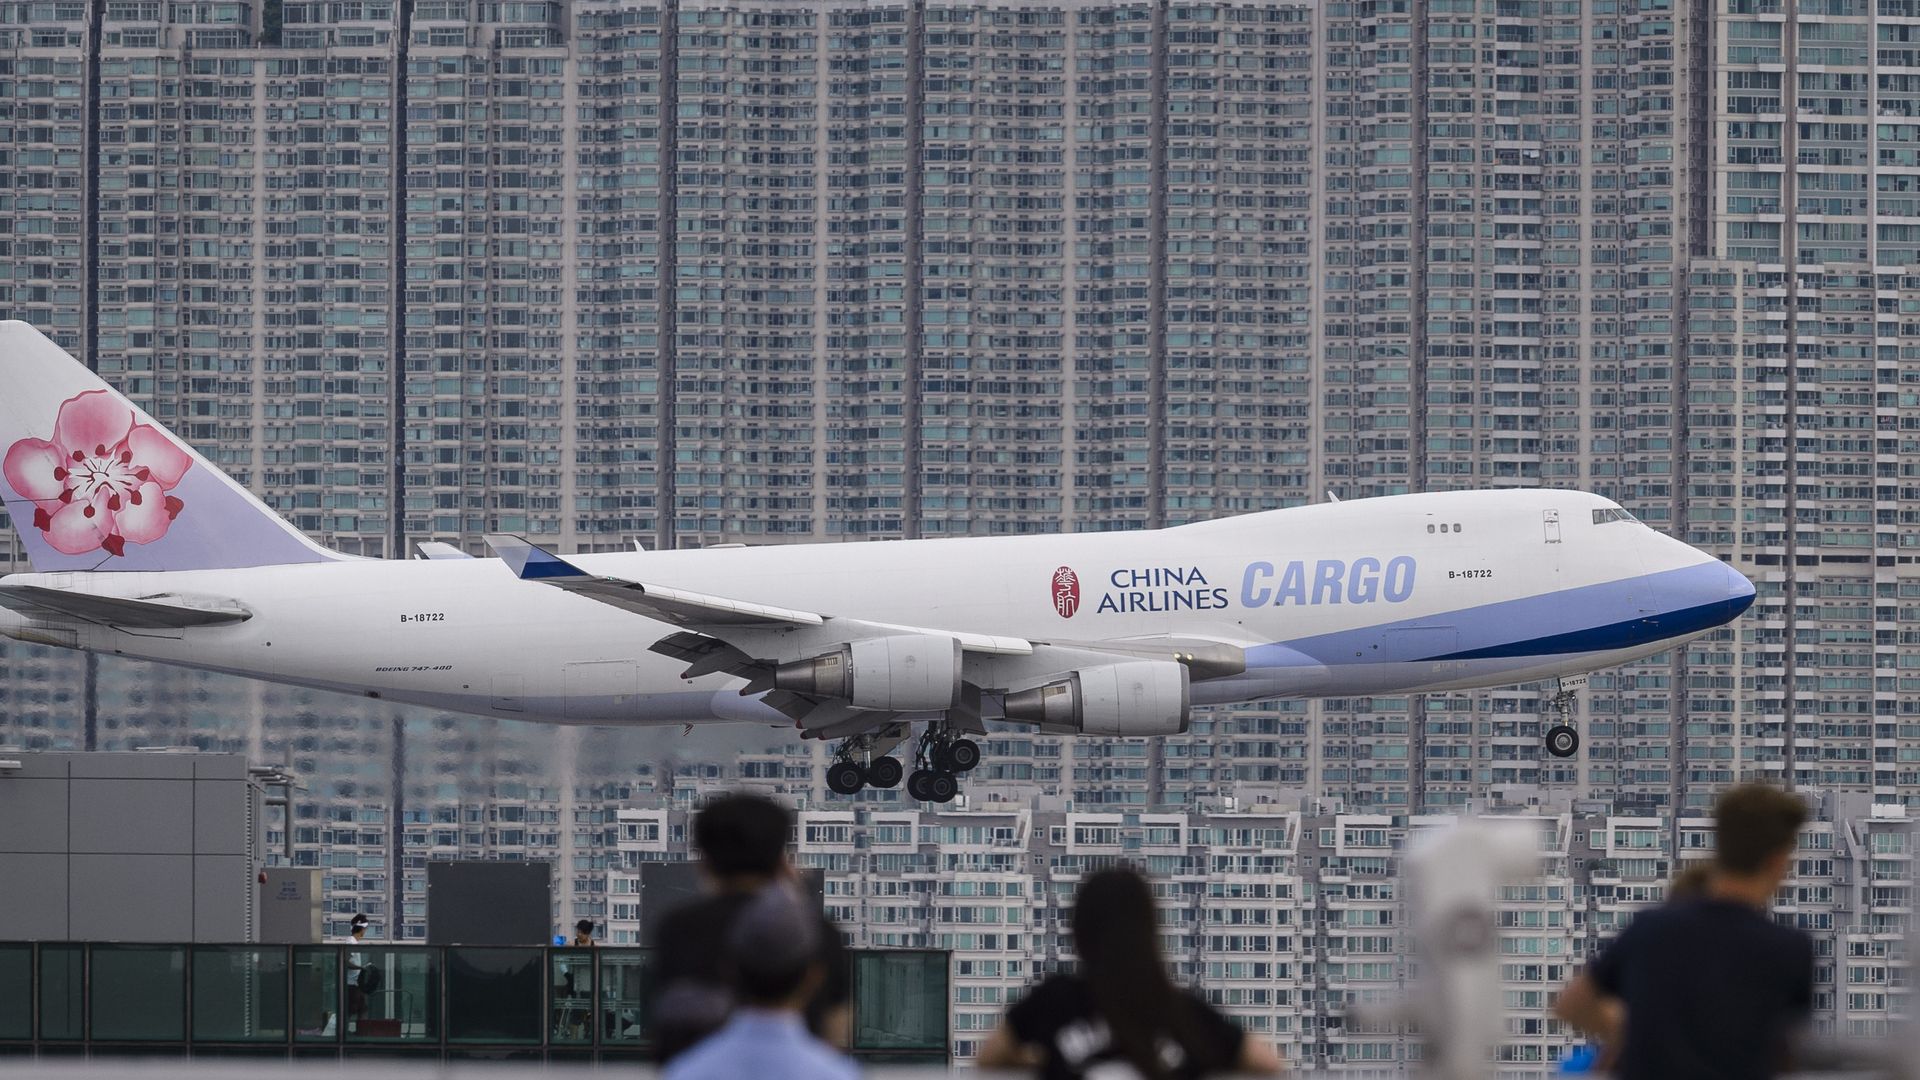 Photo of a landing cargo plane, in front of rows of high-rise buildings